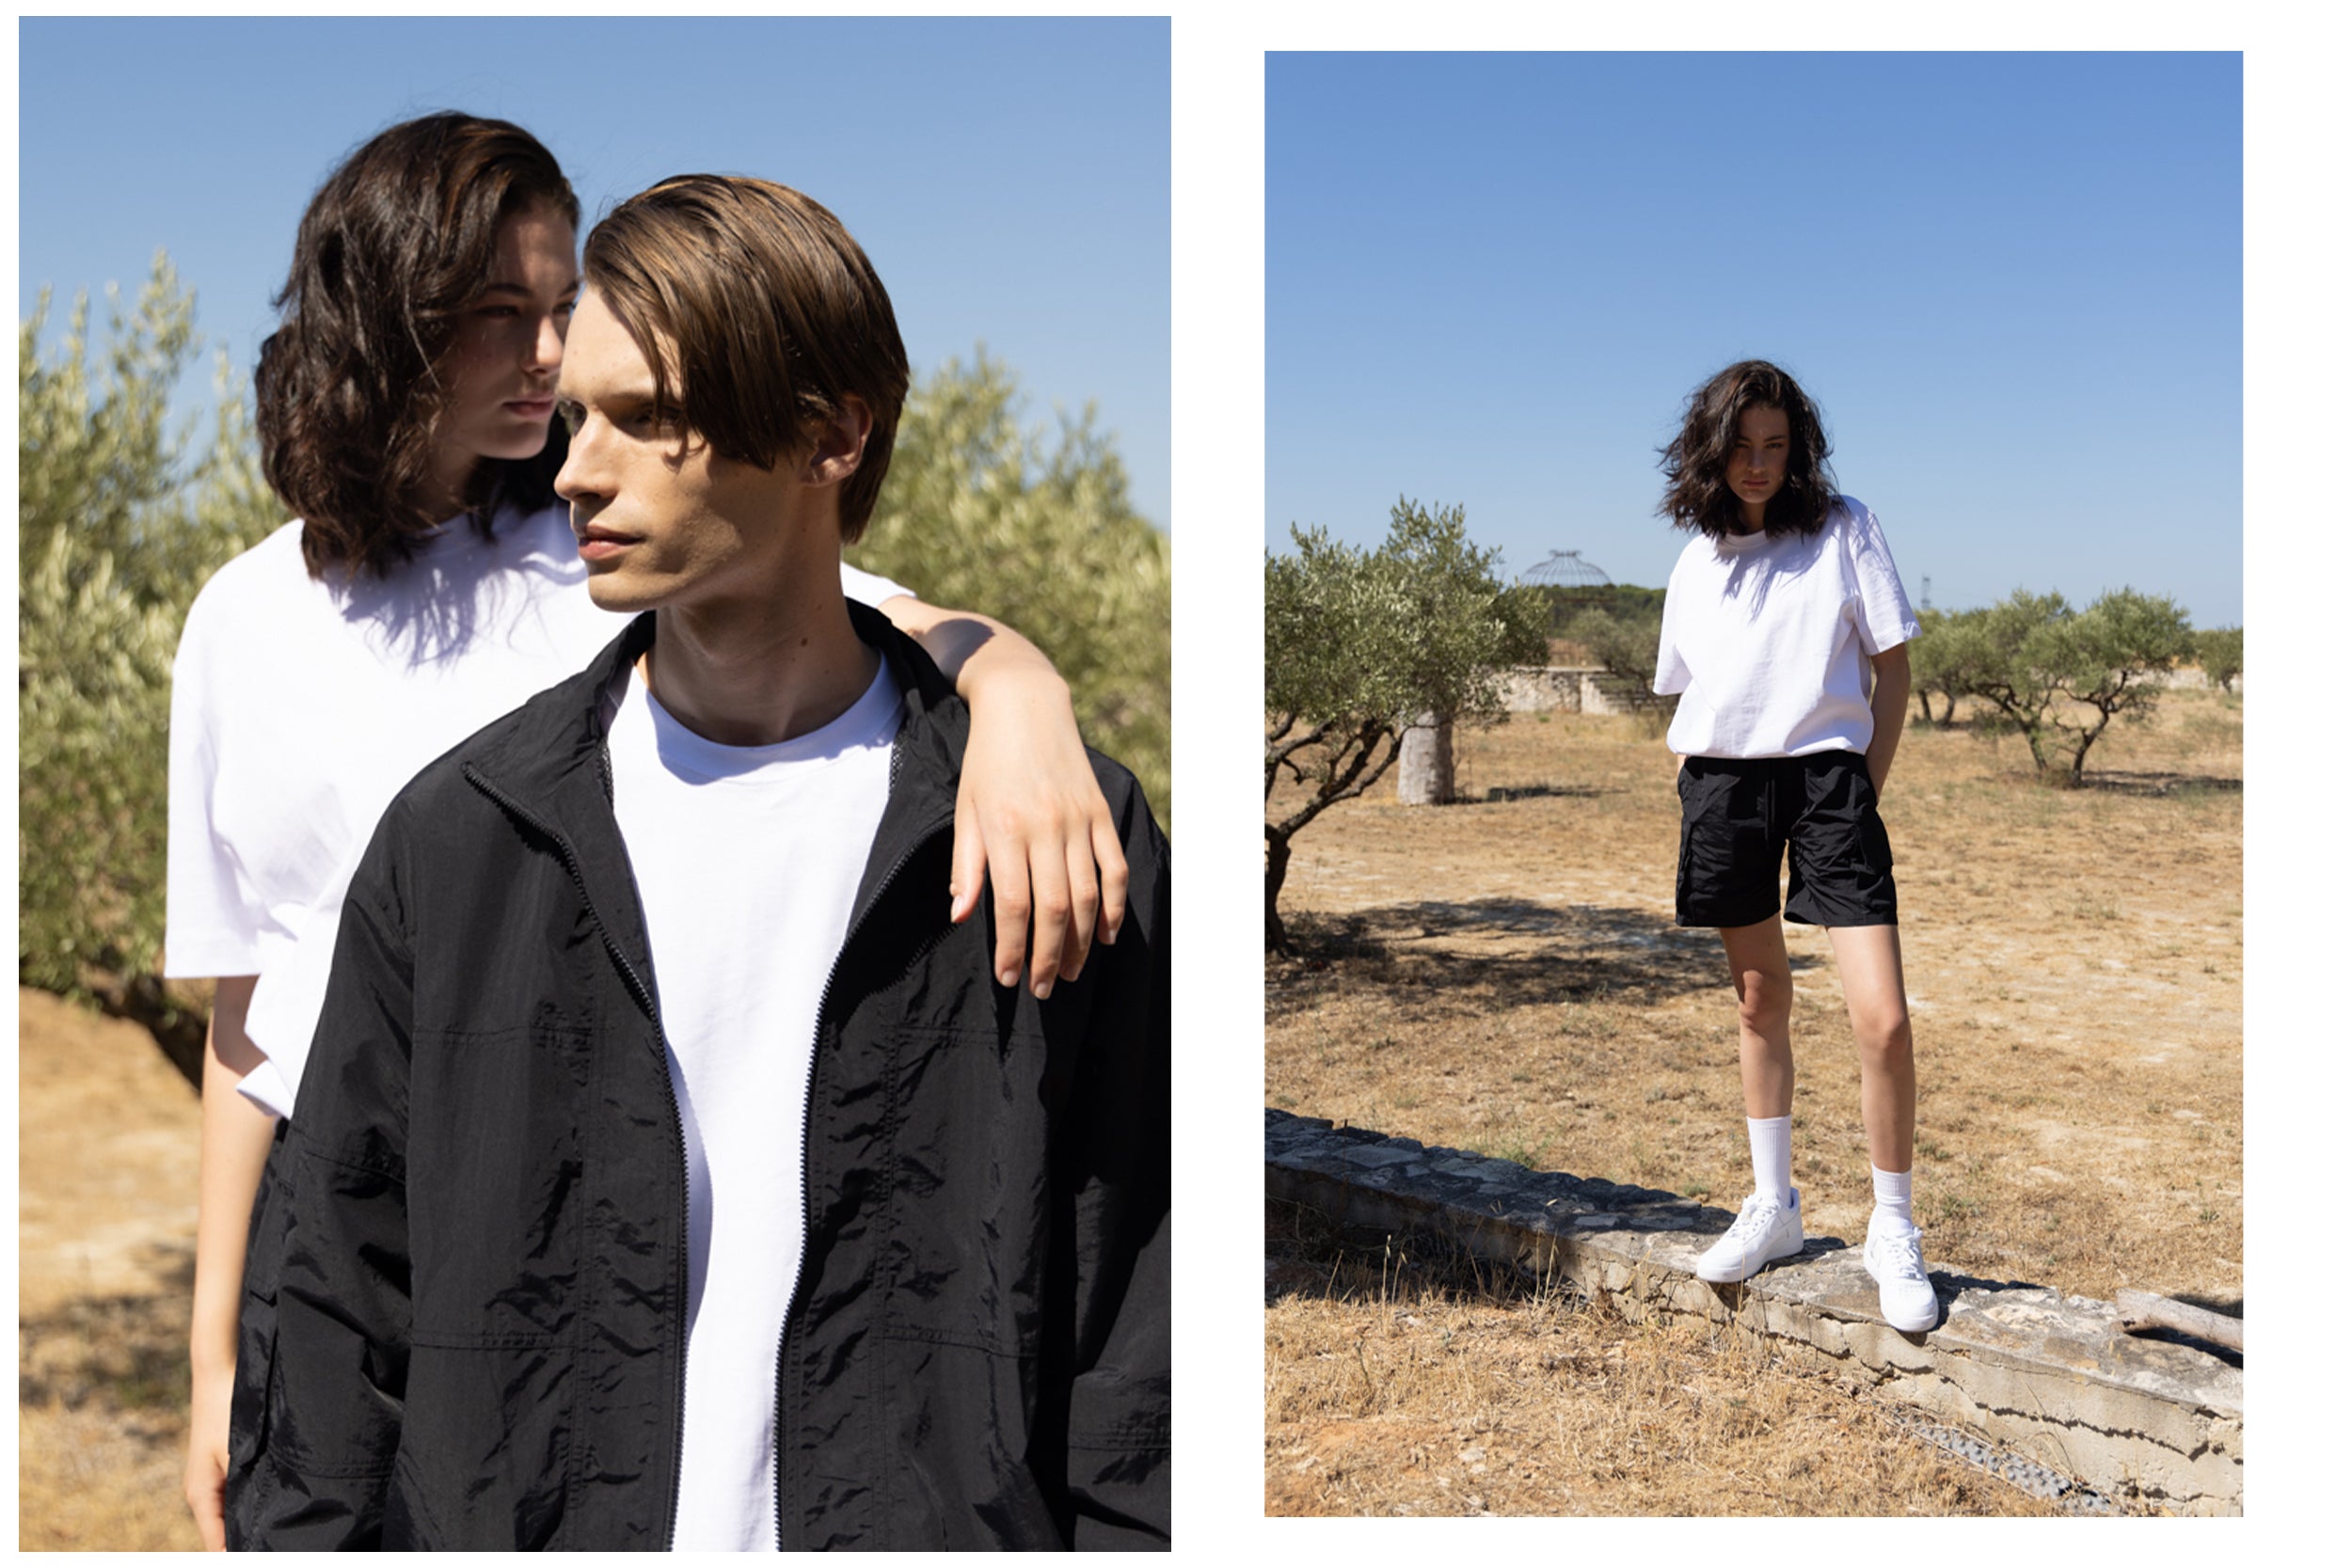 A male model wearing a black zip-up jacket and black cargo pants stands beside a female model wearing a white t-shirt and black cargo shorts, posing in a grassy field.